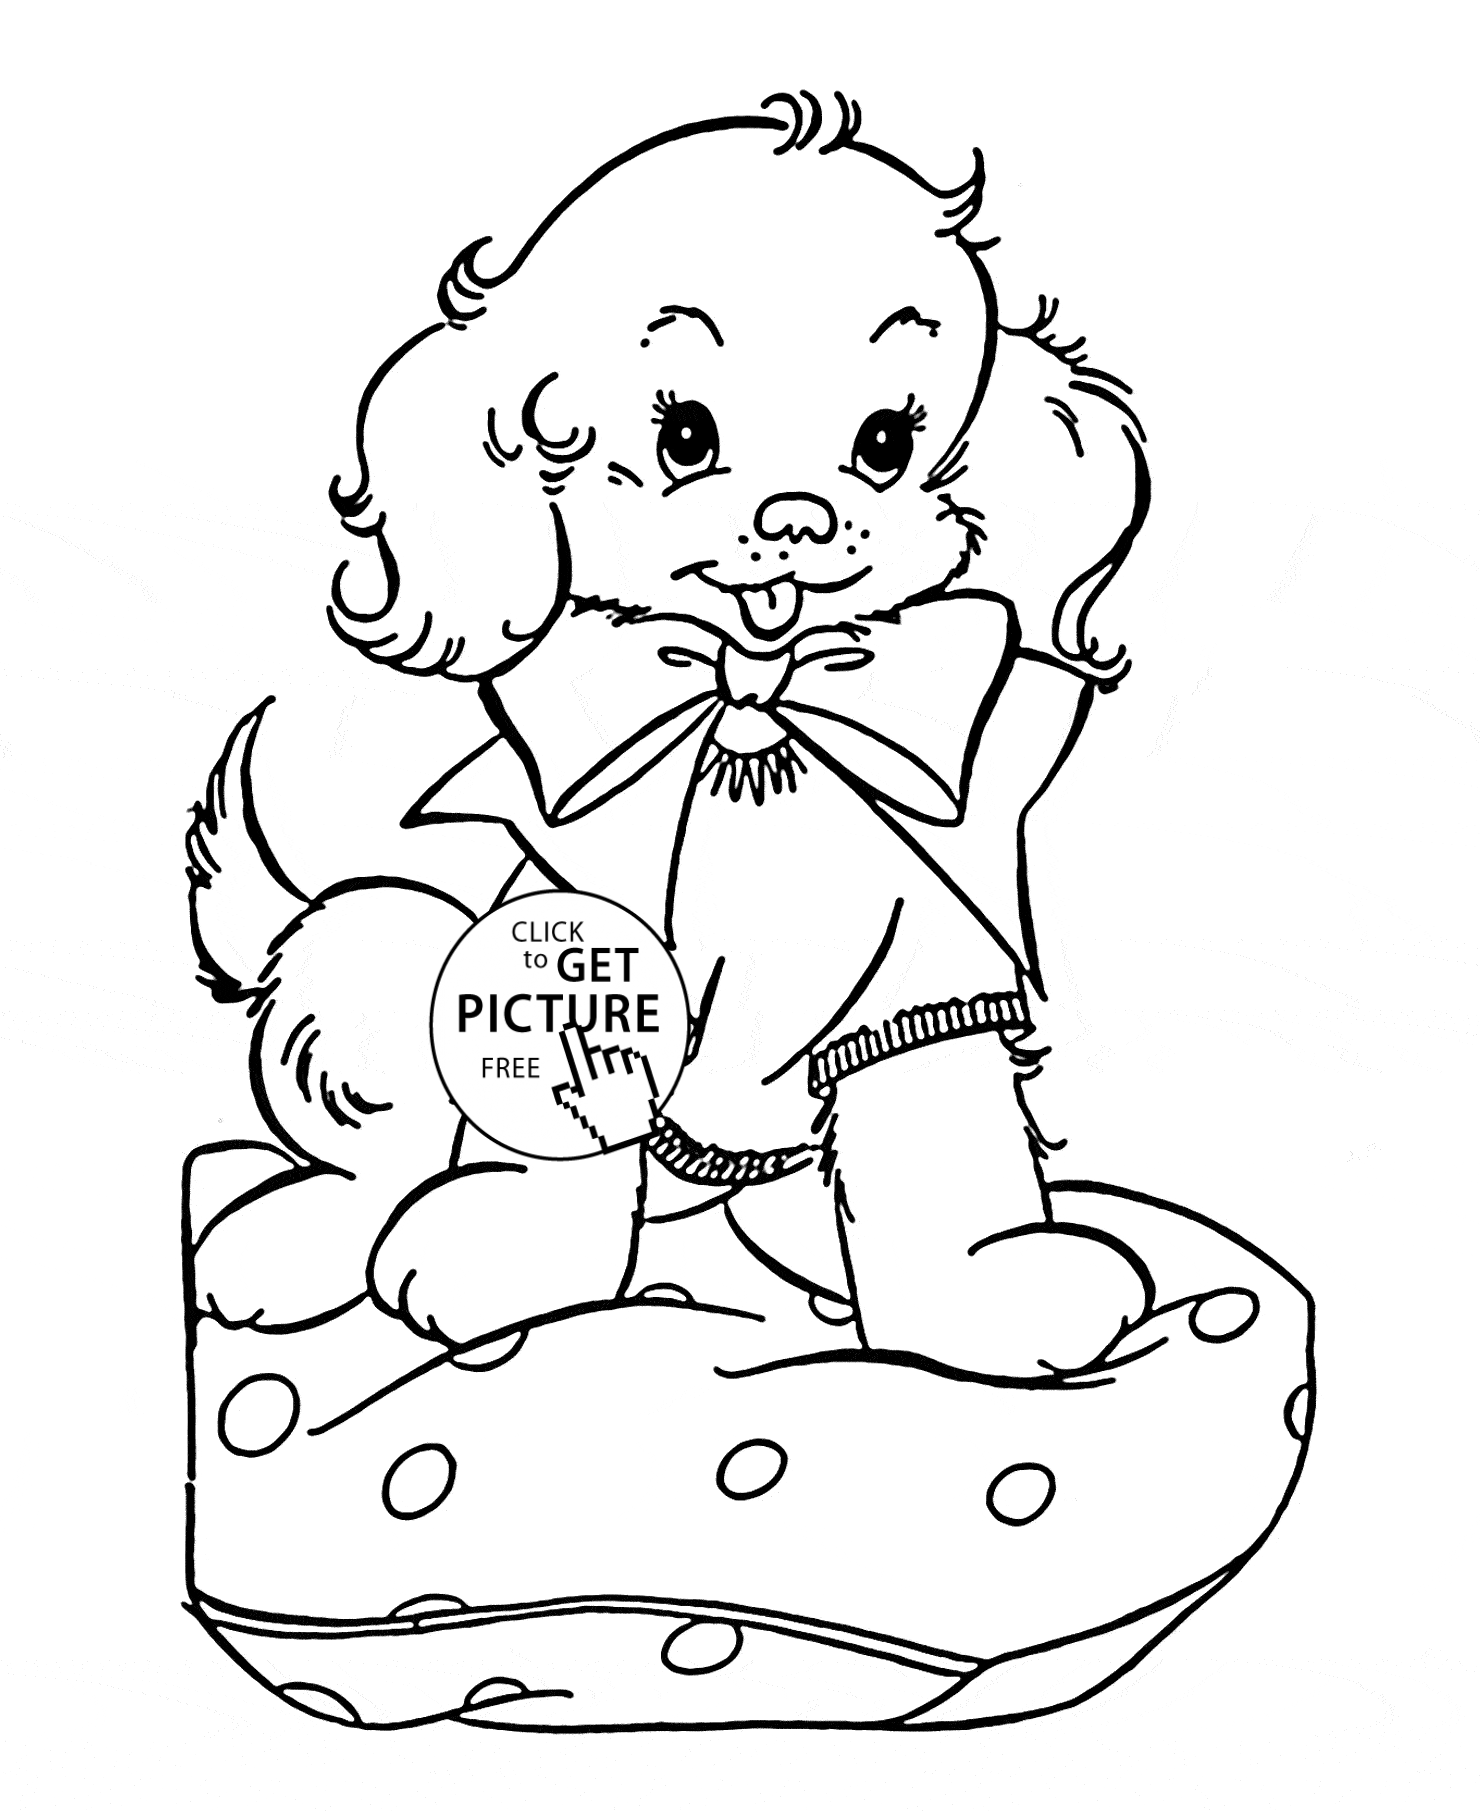 Cute Puppy coloring page for kids, animal coloring pages ...